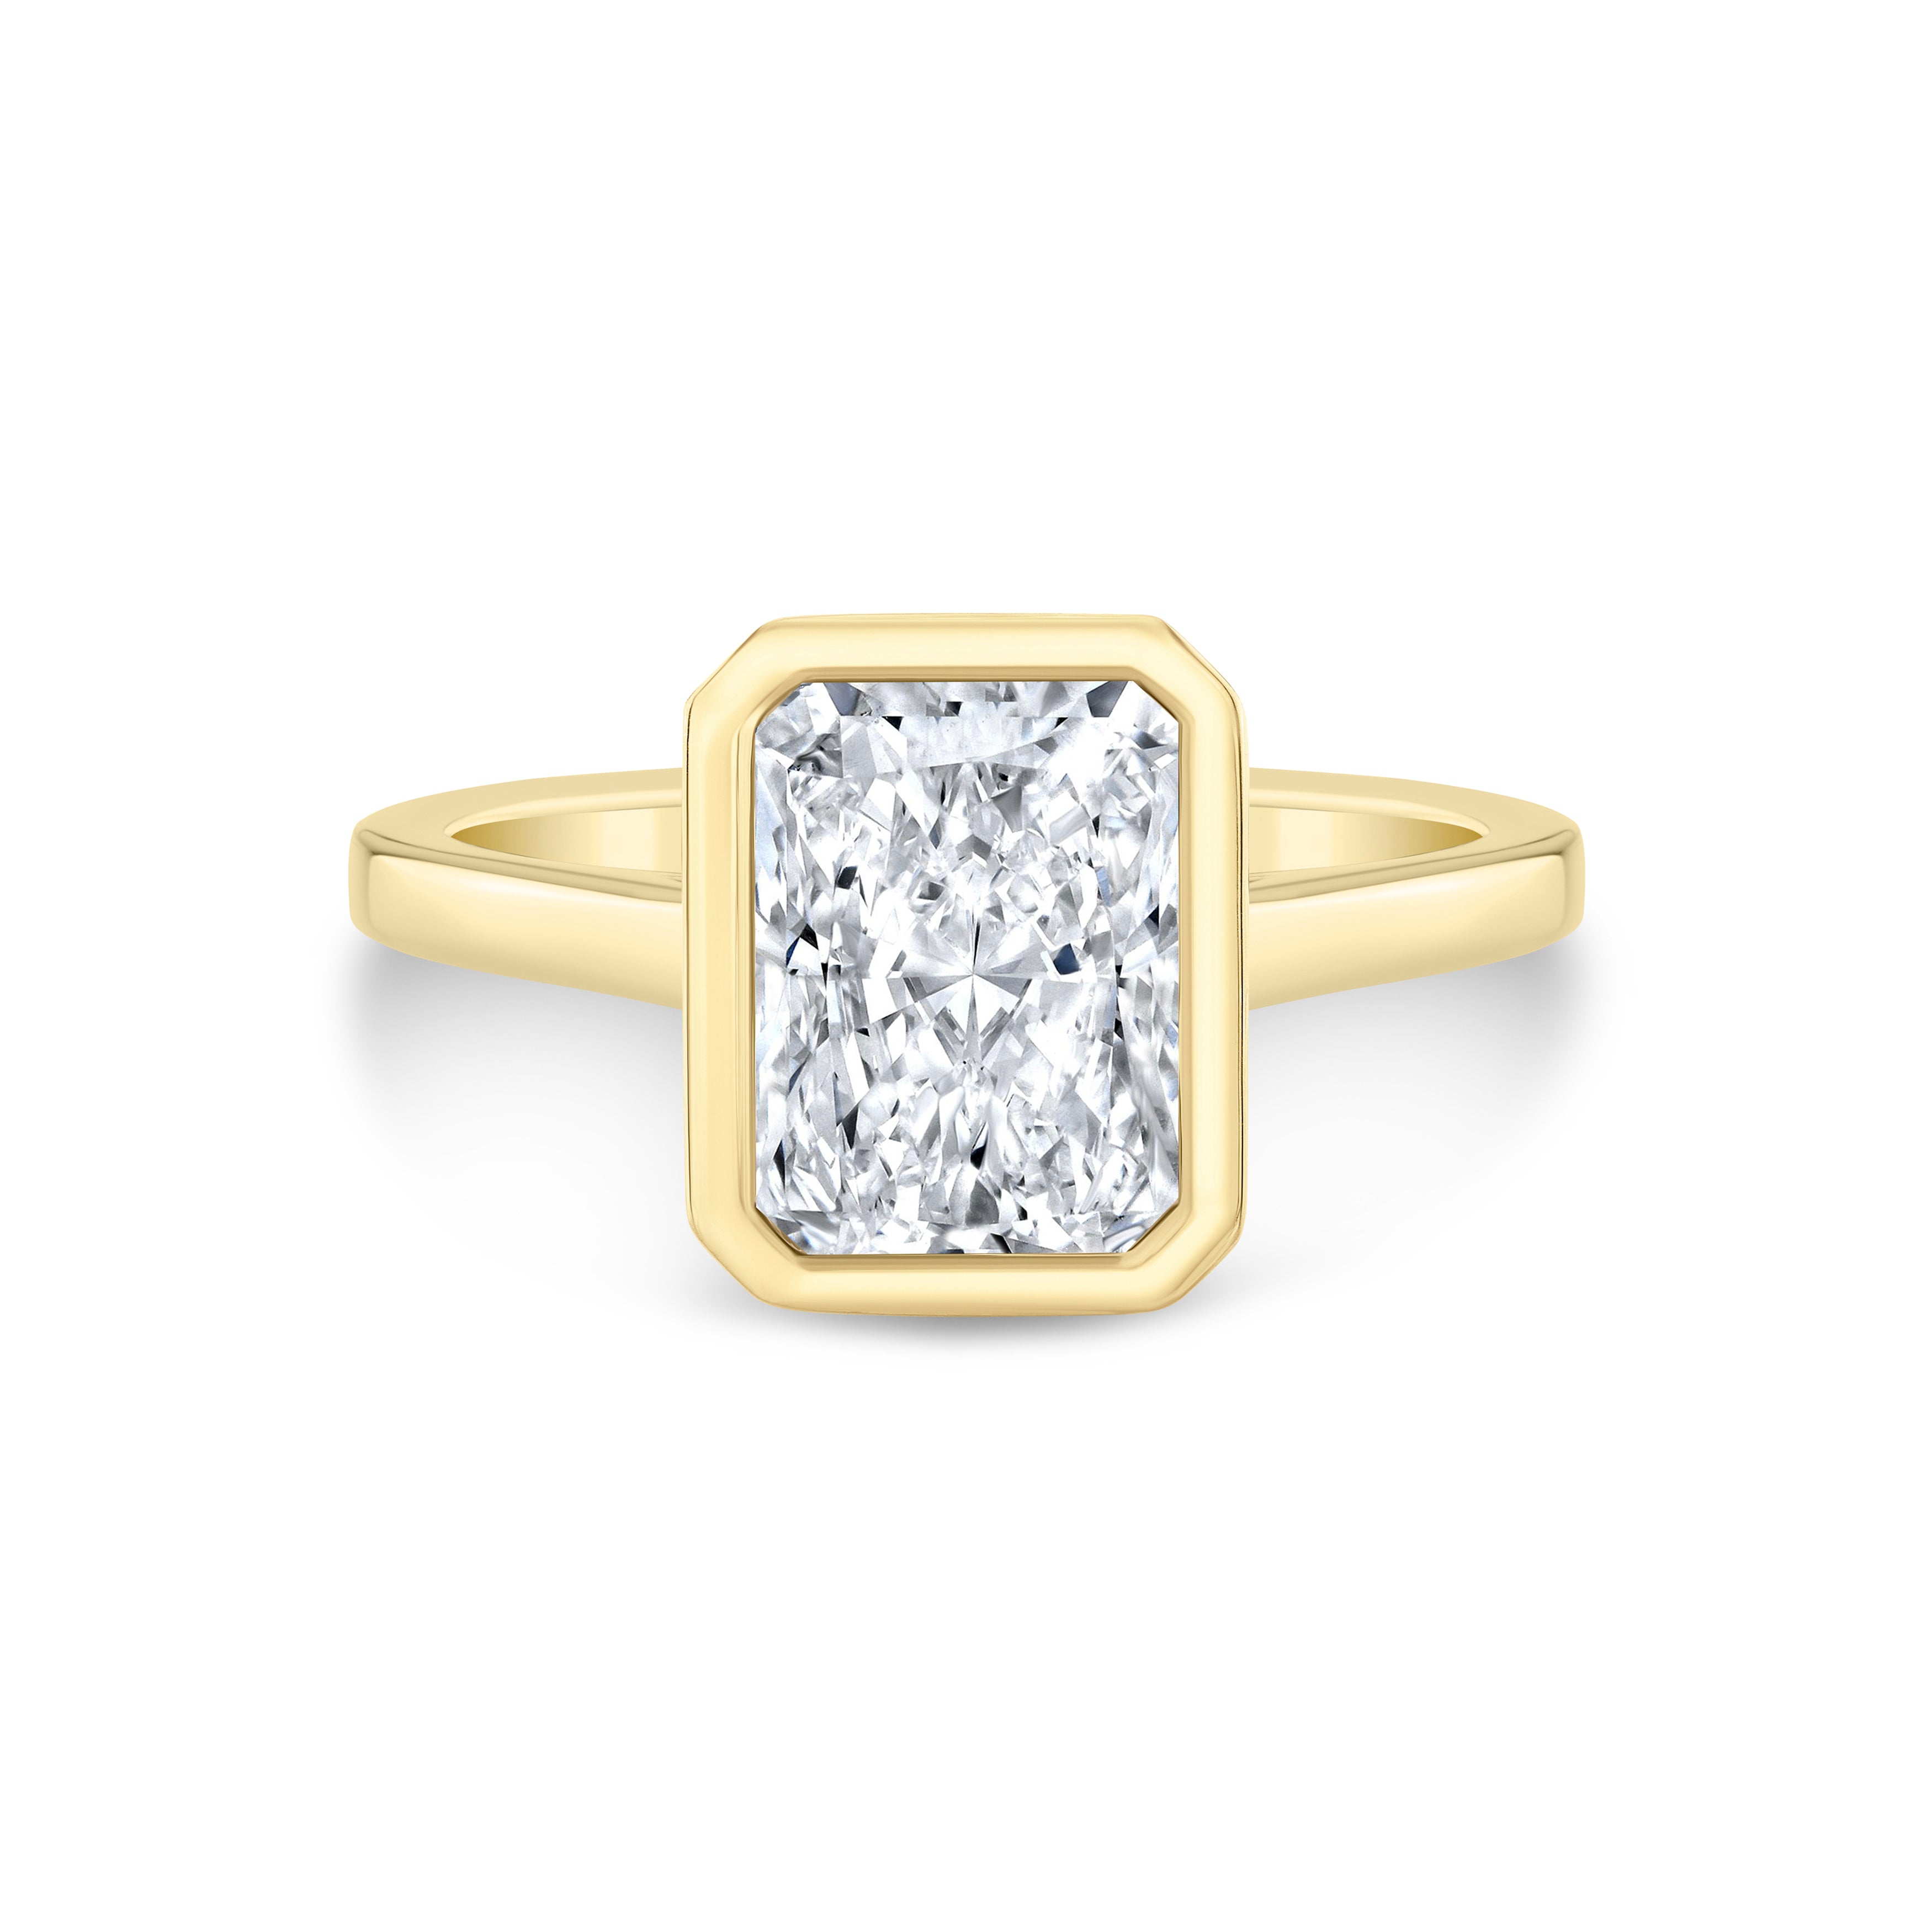 radiant cut diamond bezel solitaire engagement ring in 14k yellow gold